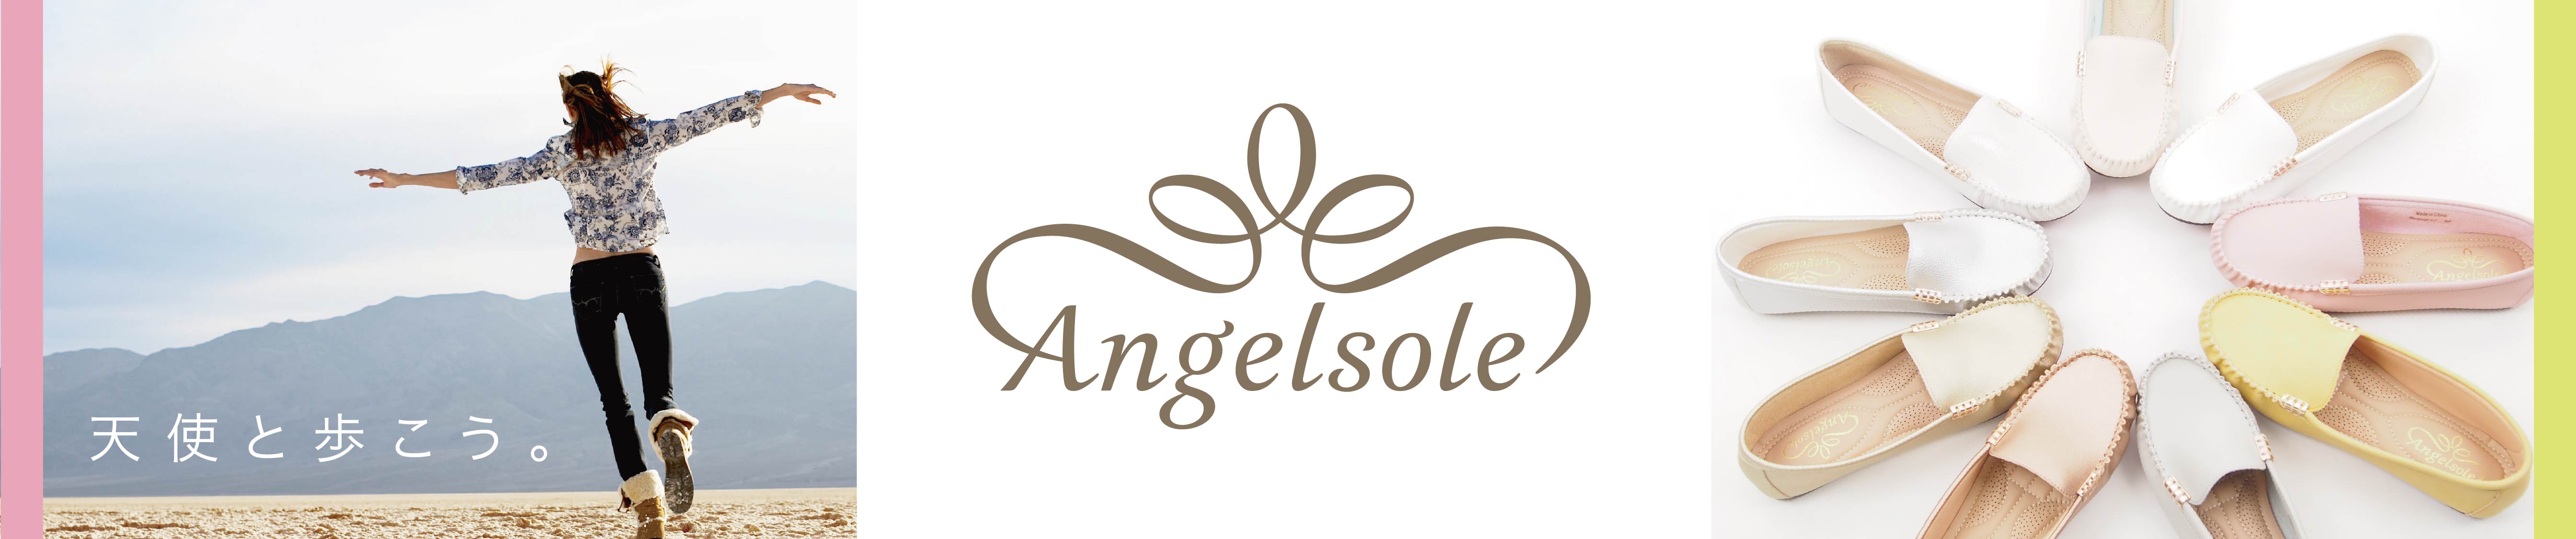 Angelsole